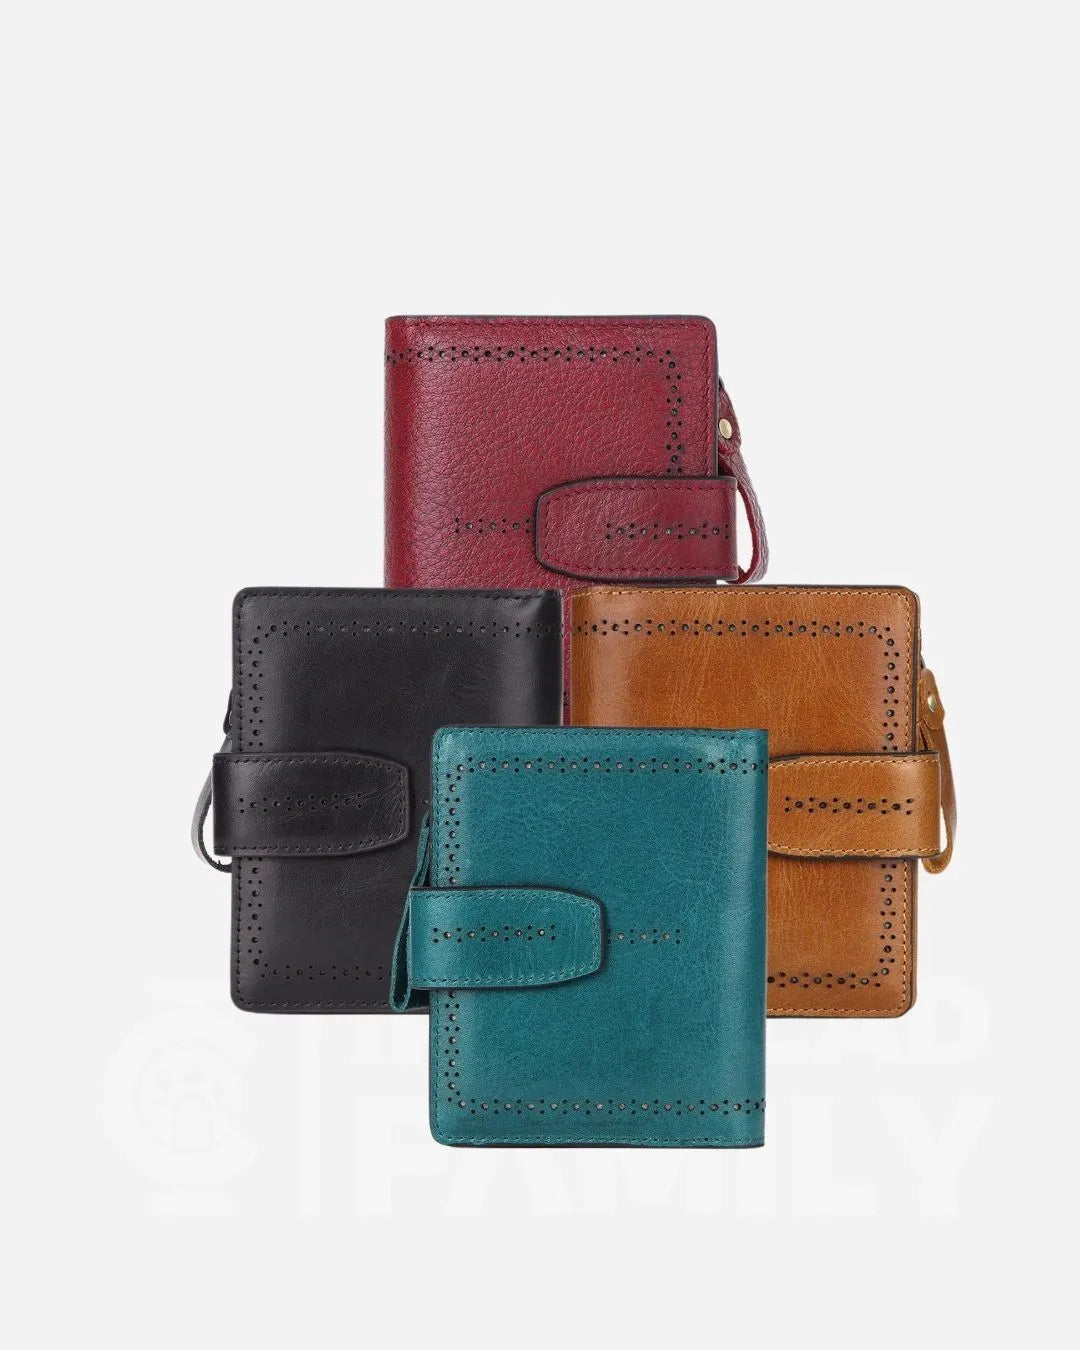 Display of four RFID blocking leather wallets in various colors with zippers